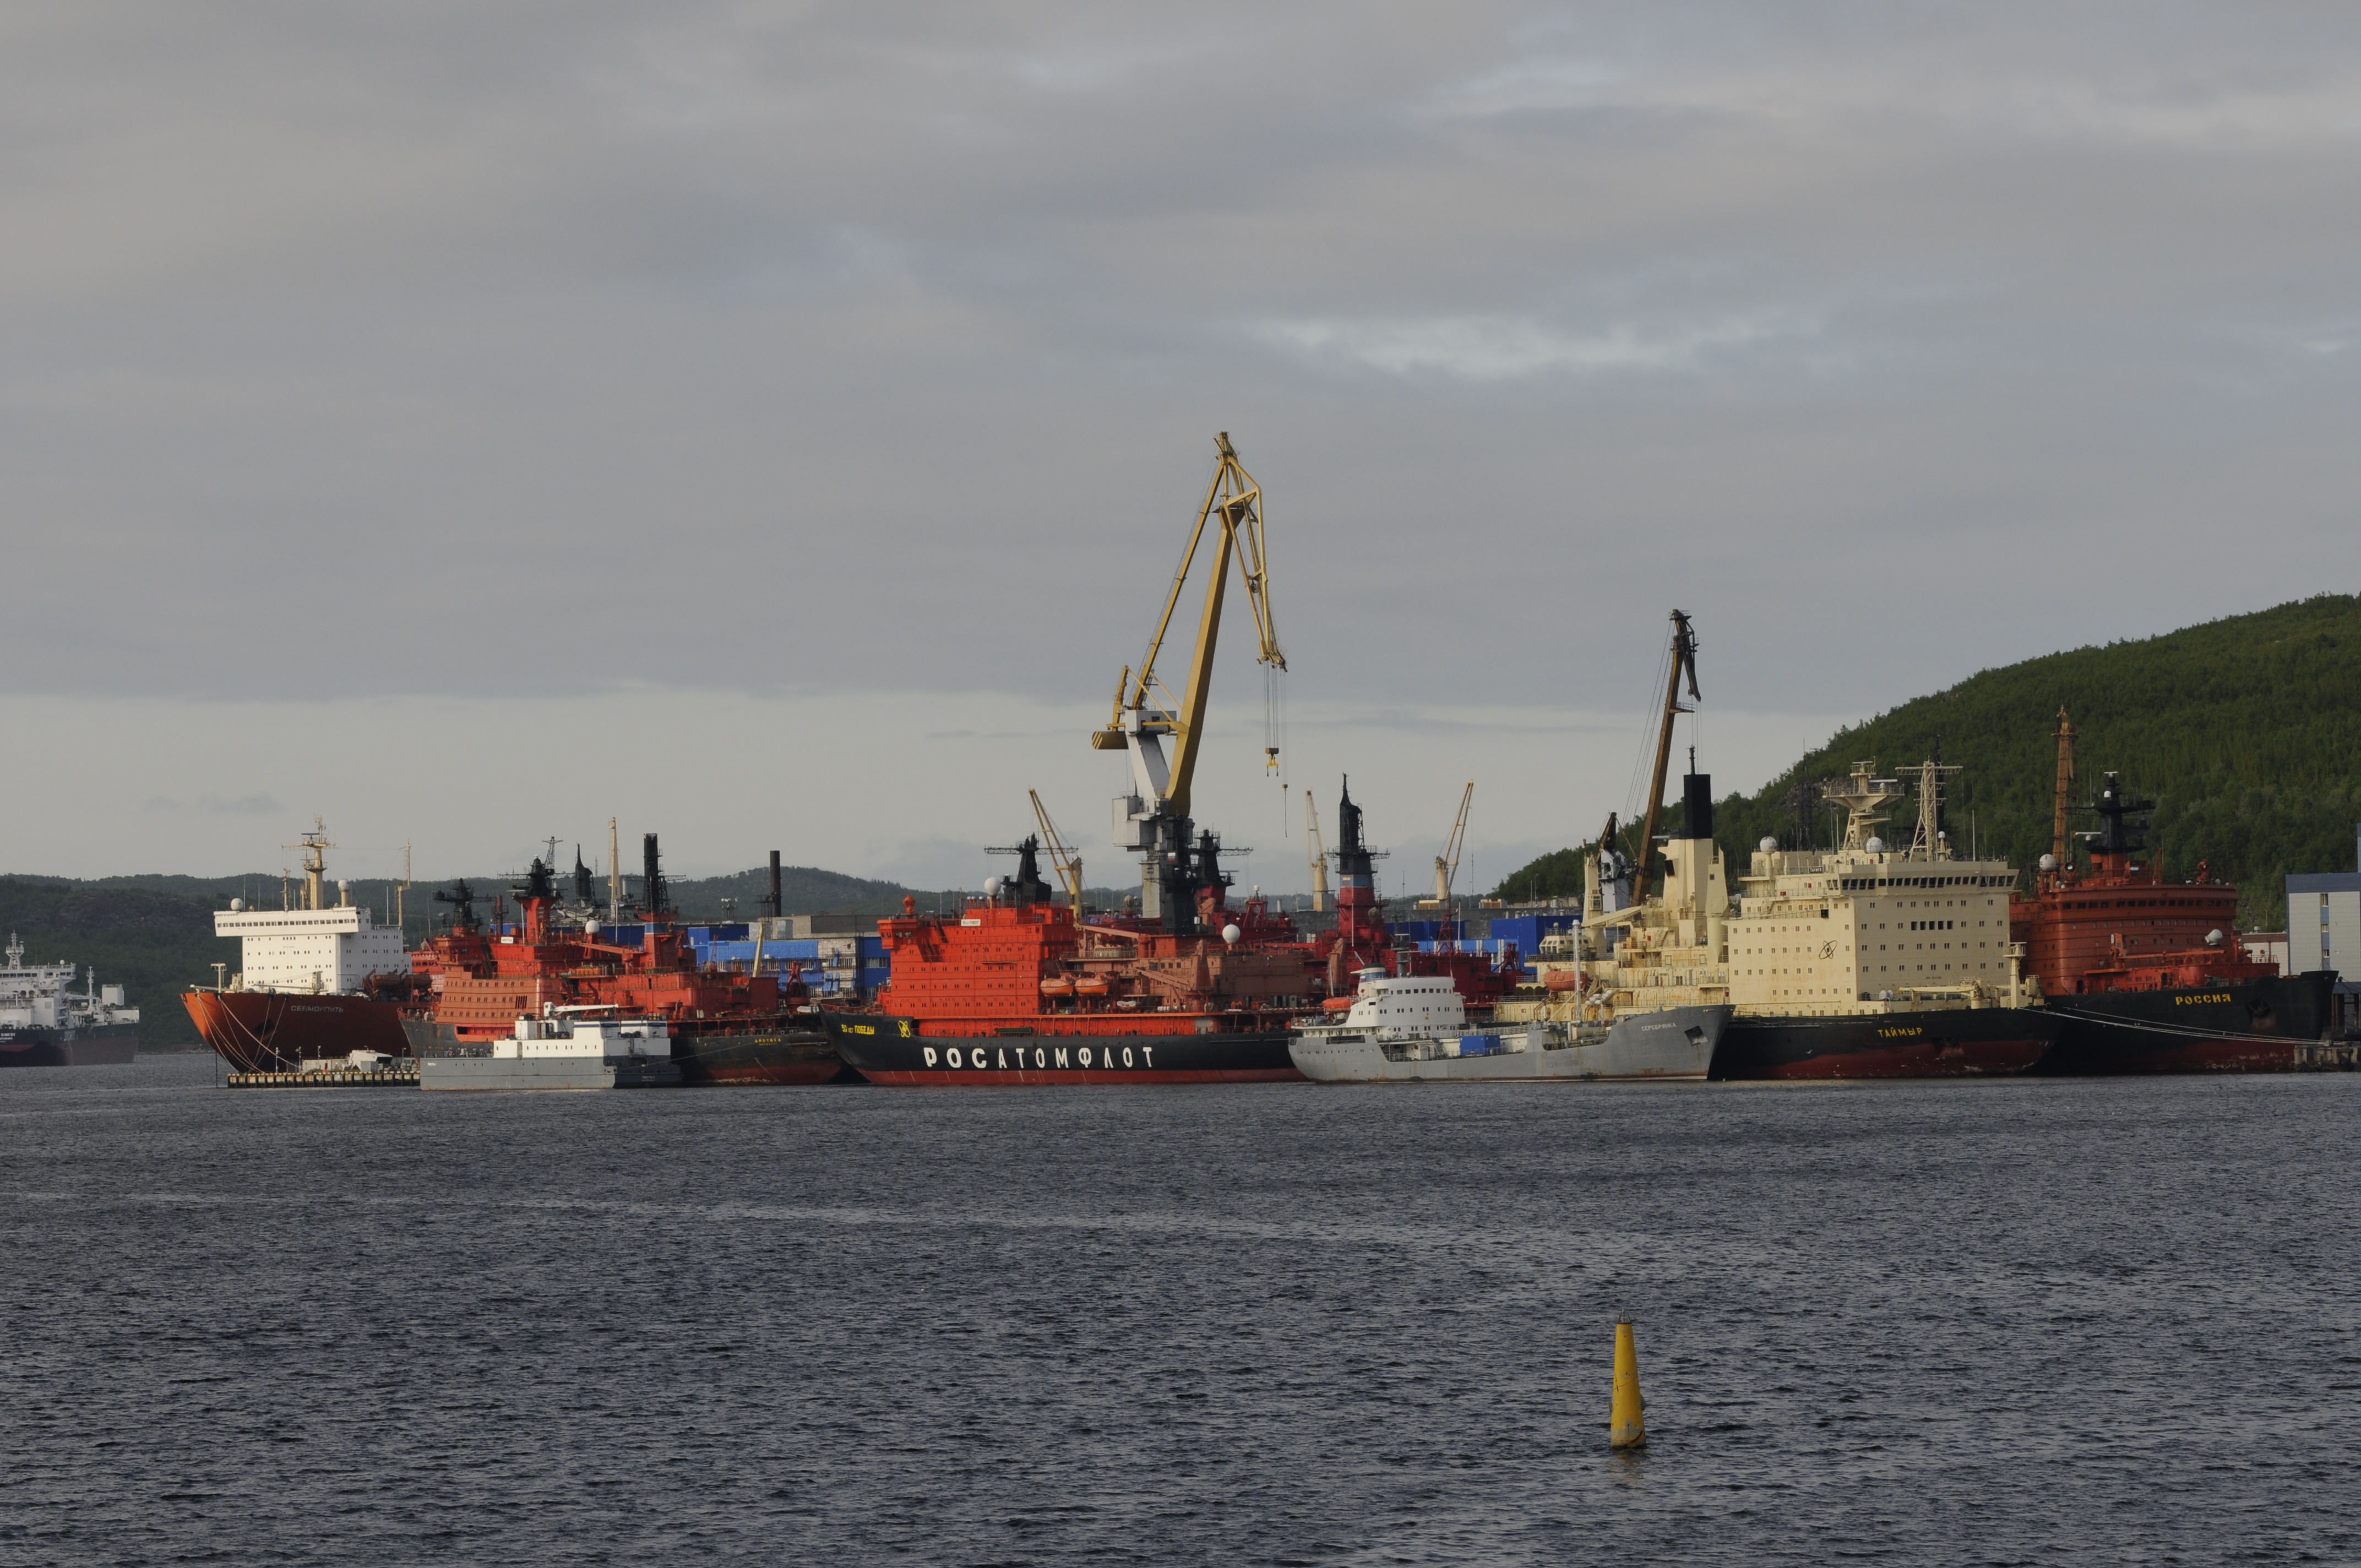 On Murmansk’s waterfront, new infrastructure is in the works for the world’s largest icebreakers